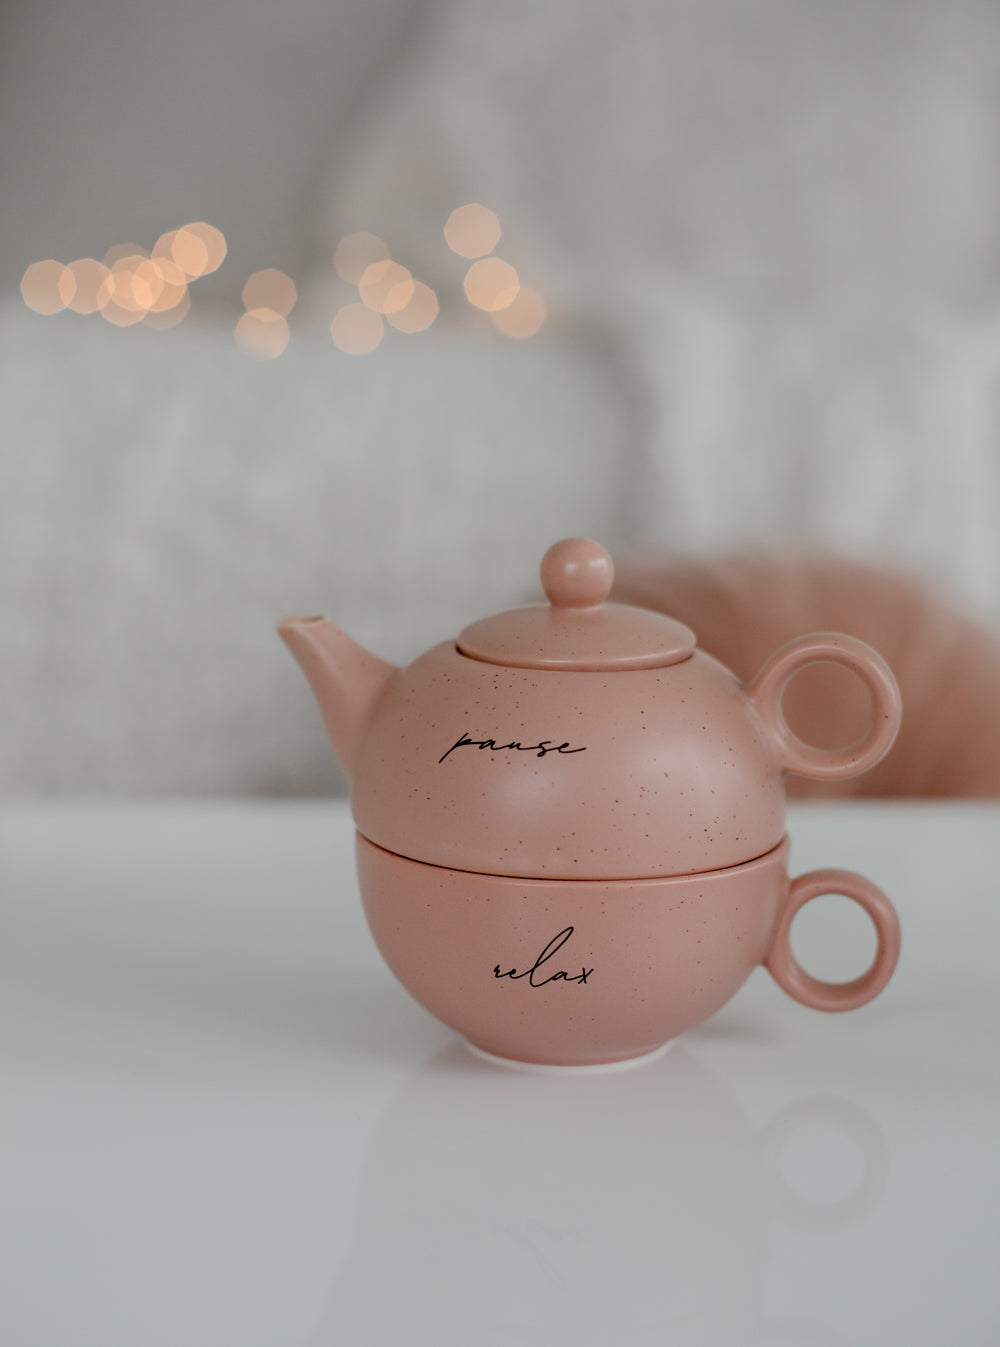 pink teapot with pause and relax written